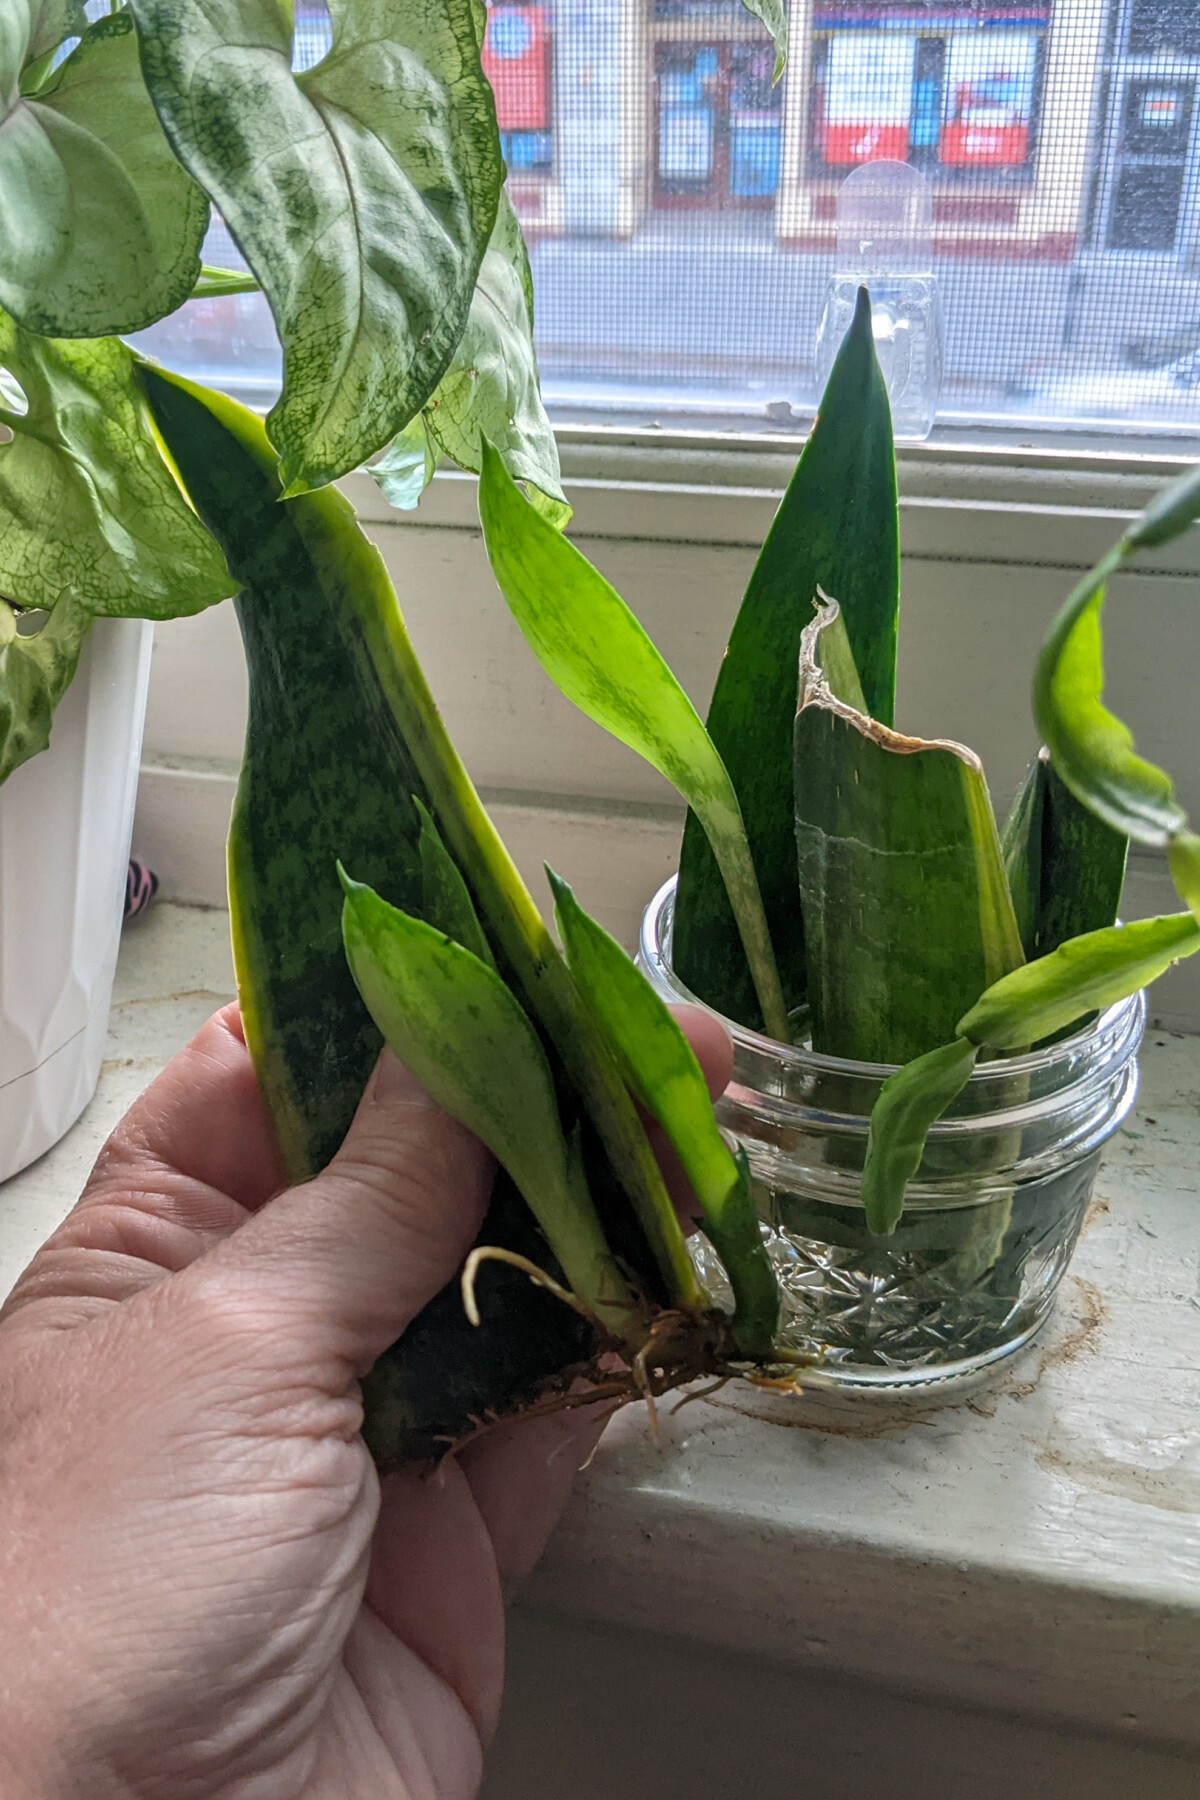 Woman's hand holding a snakeplant cutting with roots